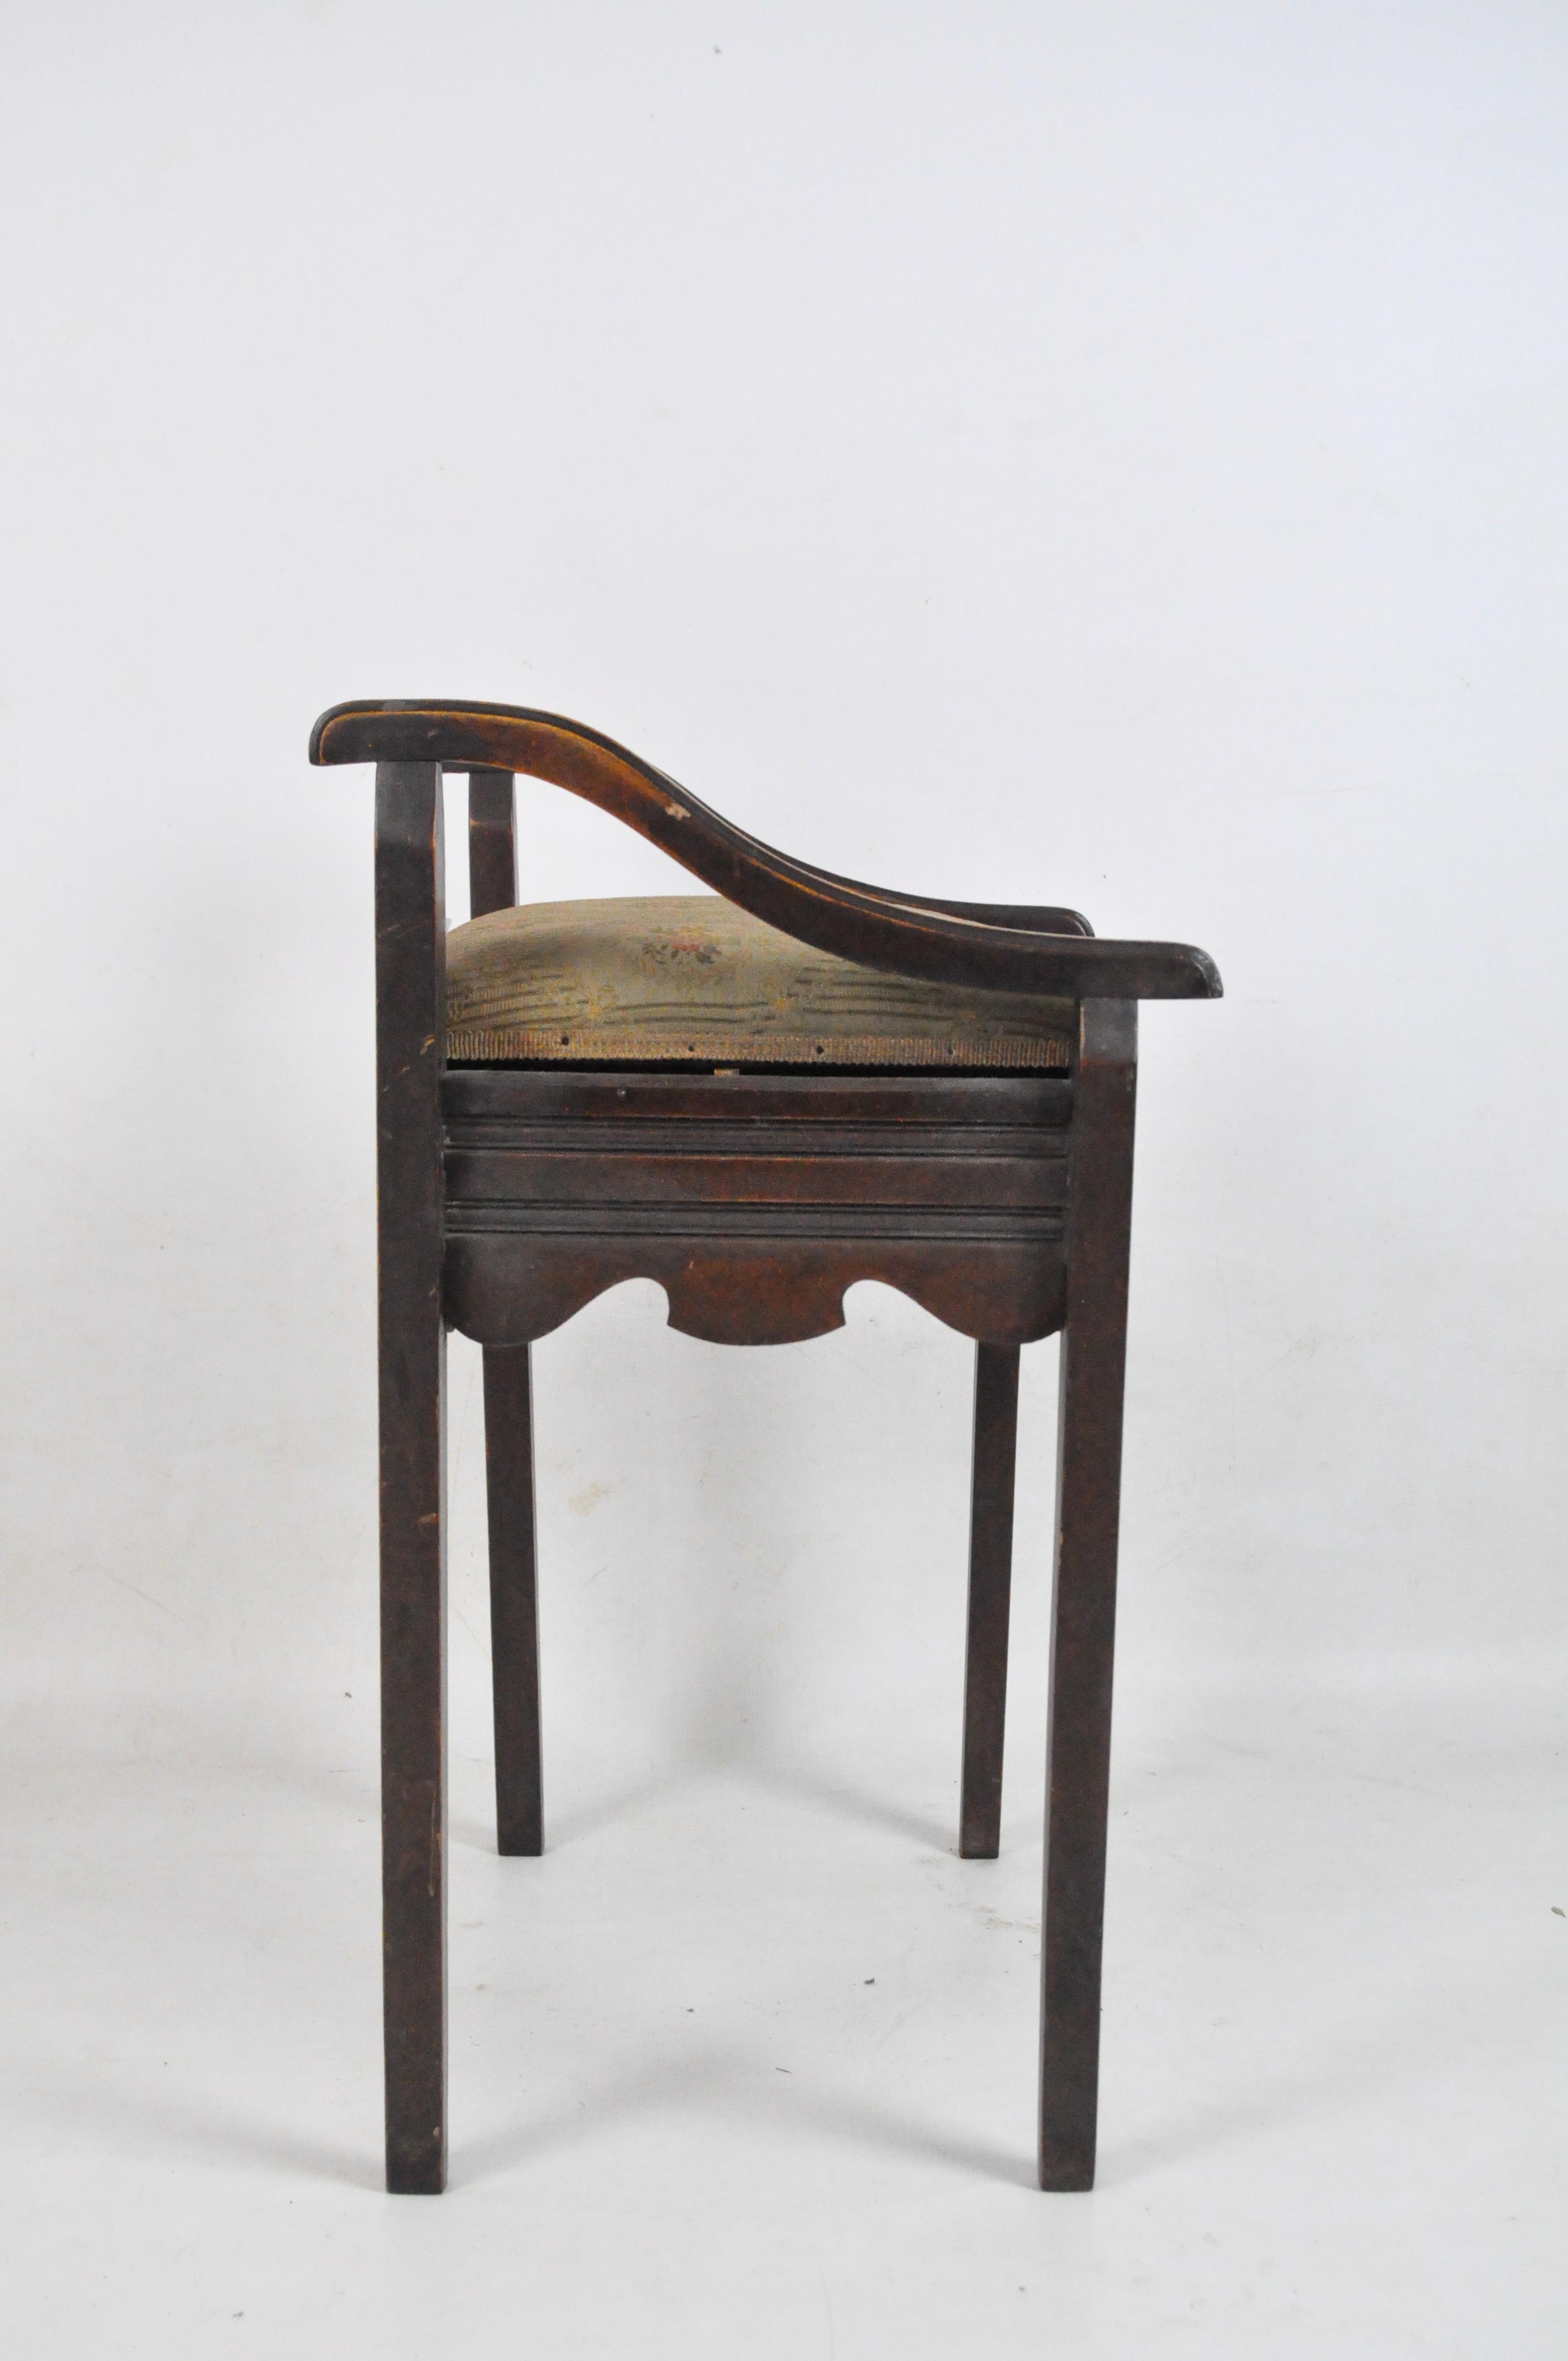 An early 20th century wooden piano stool, - Image 2 of 2